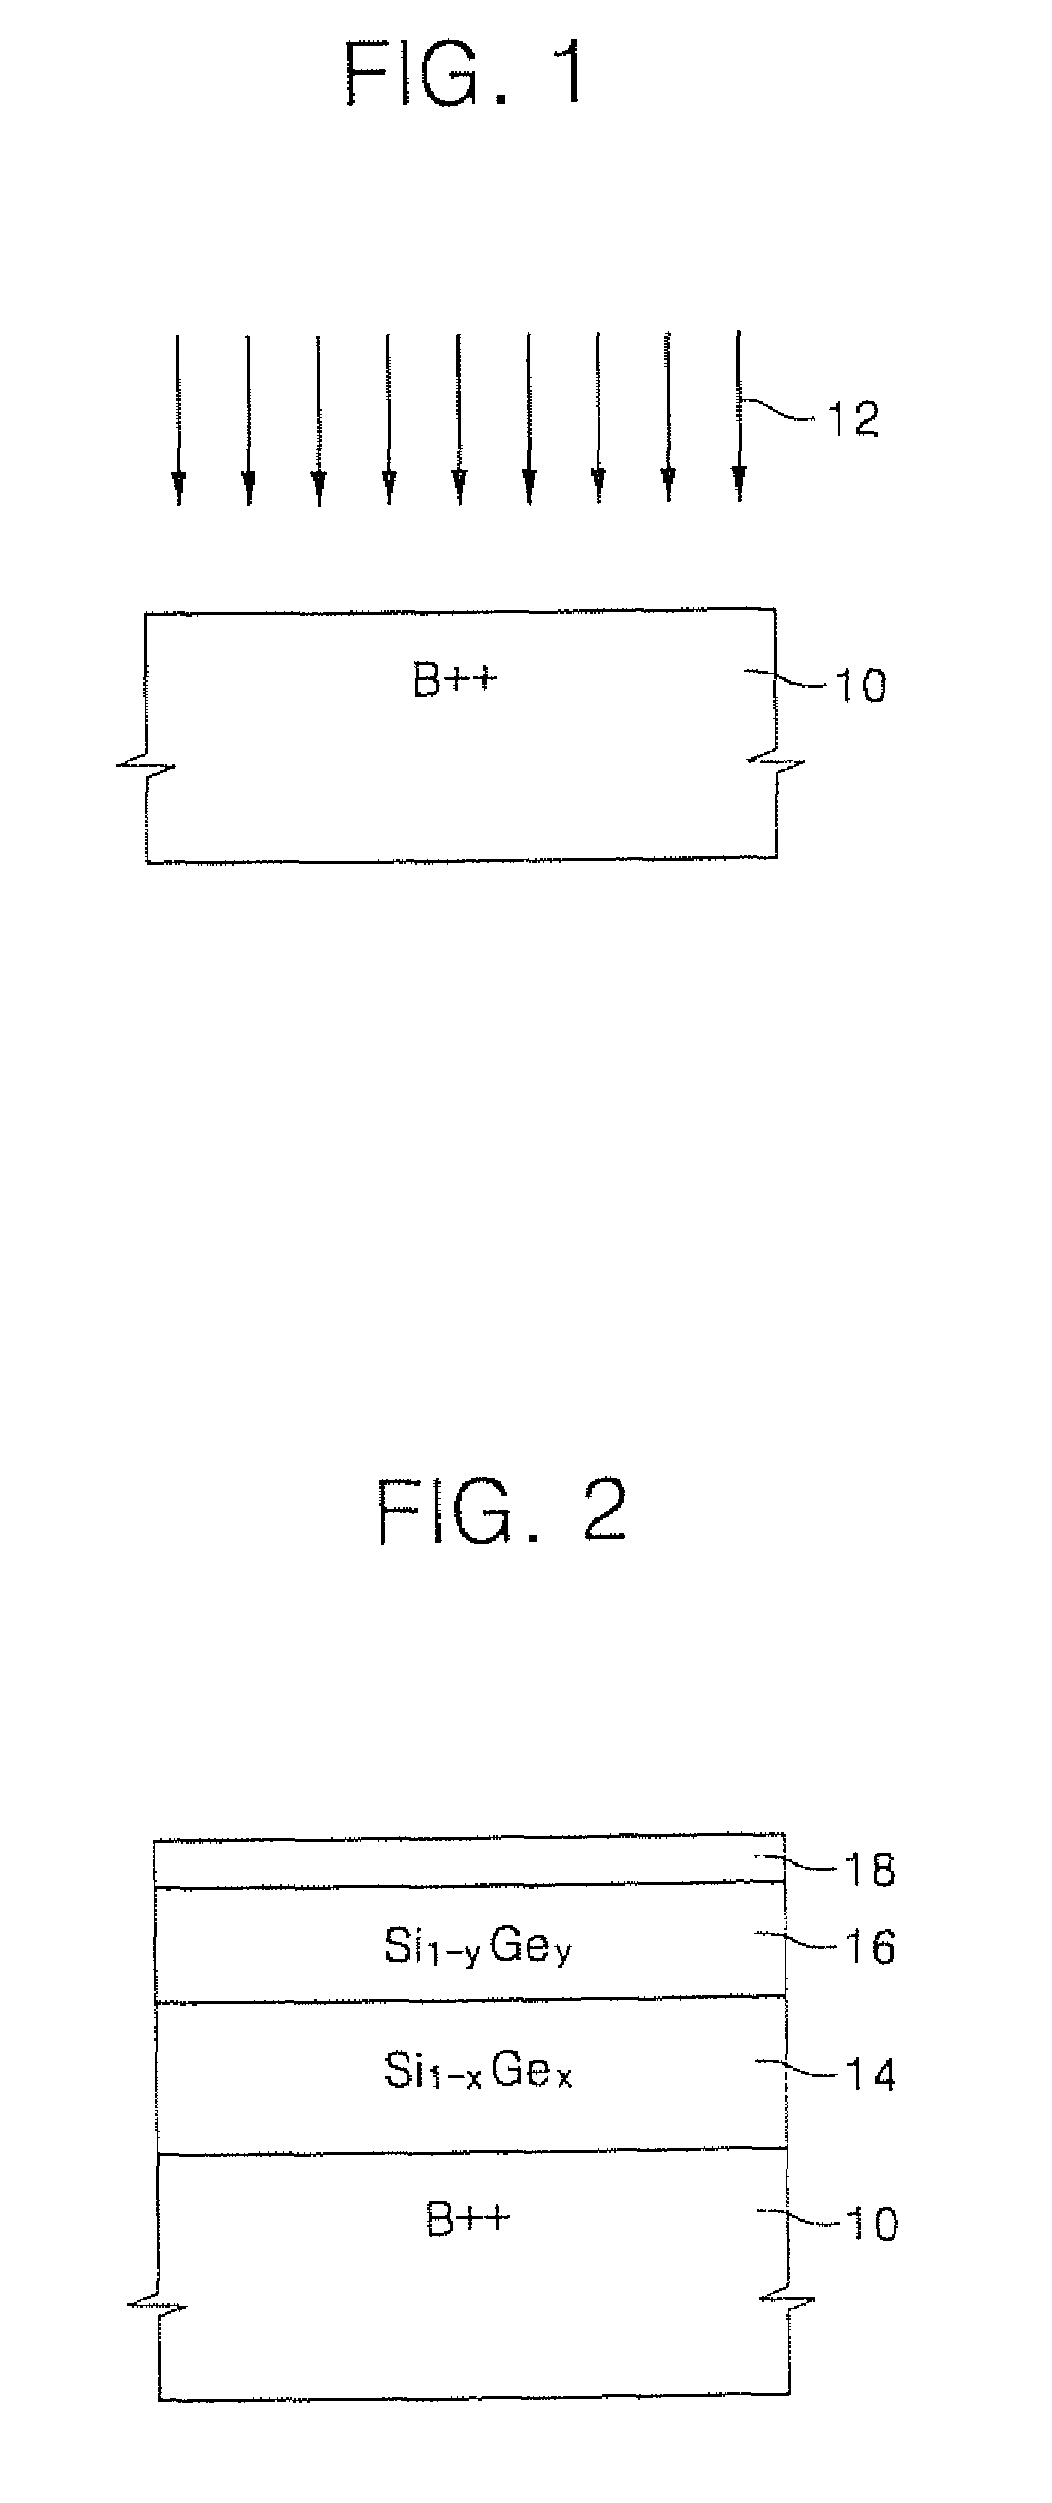 Method of Forming a Semiconductor Device Having a Strained Silicon Layer on a Silicon-Germanium Layer